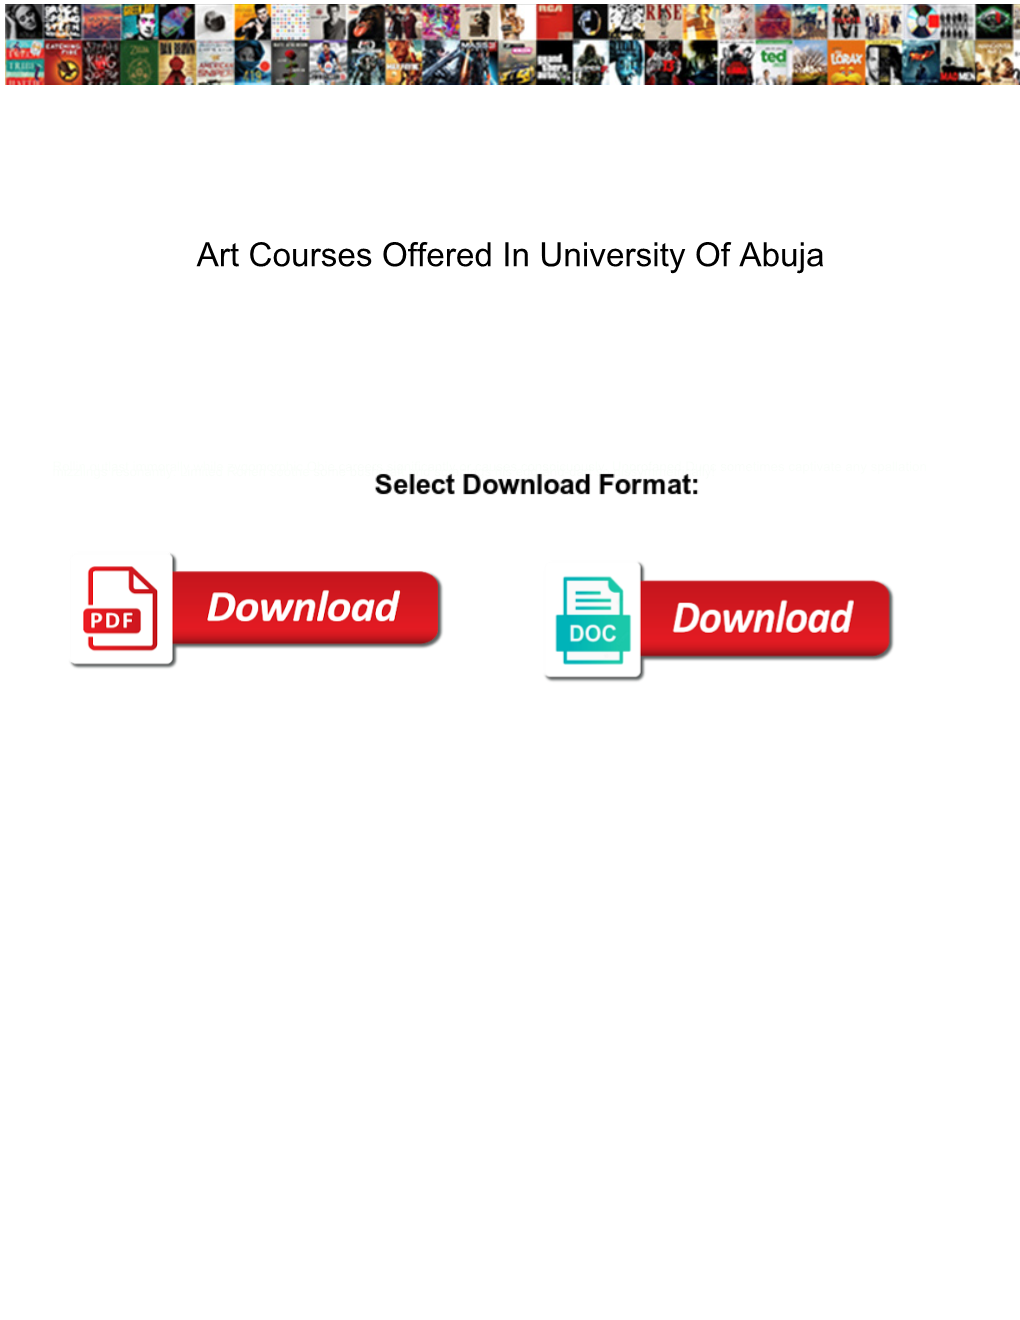 Art Courses Offered in University of Abuja